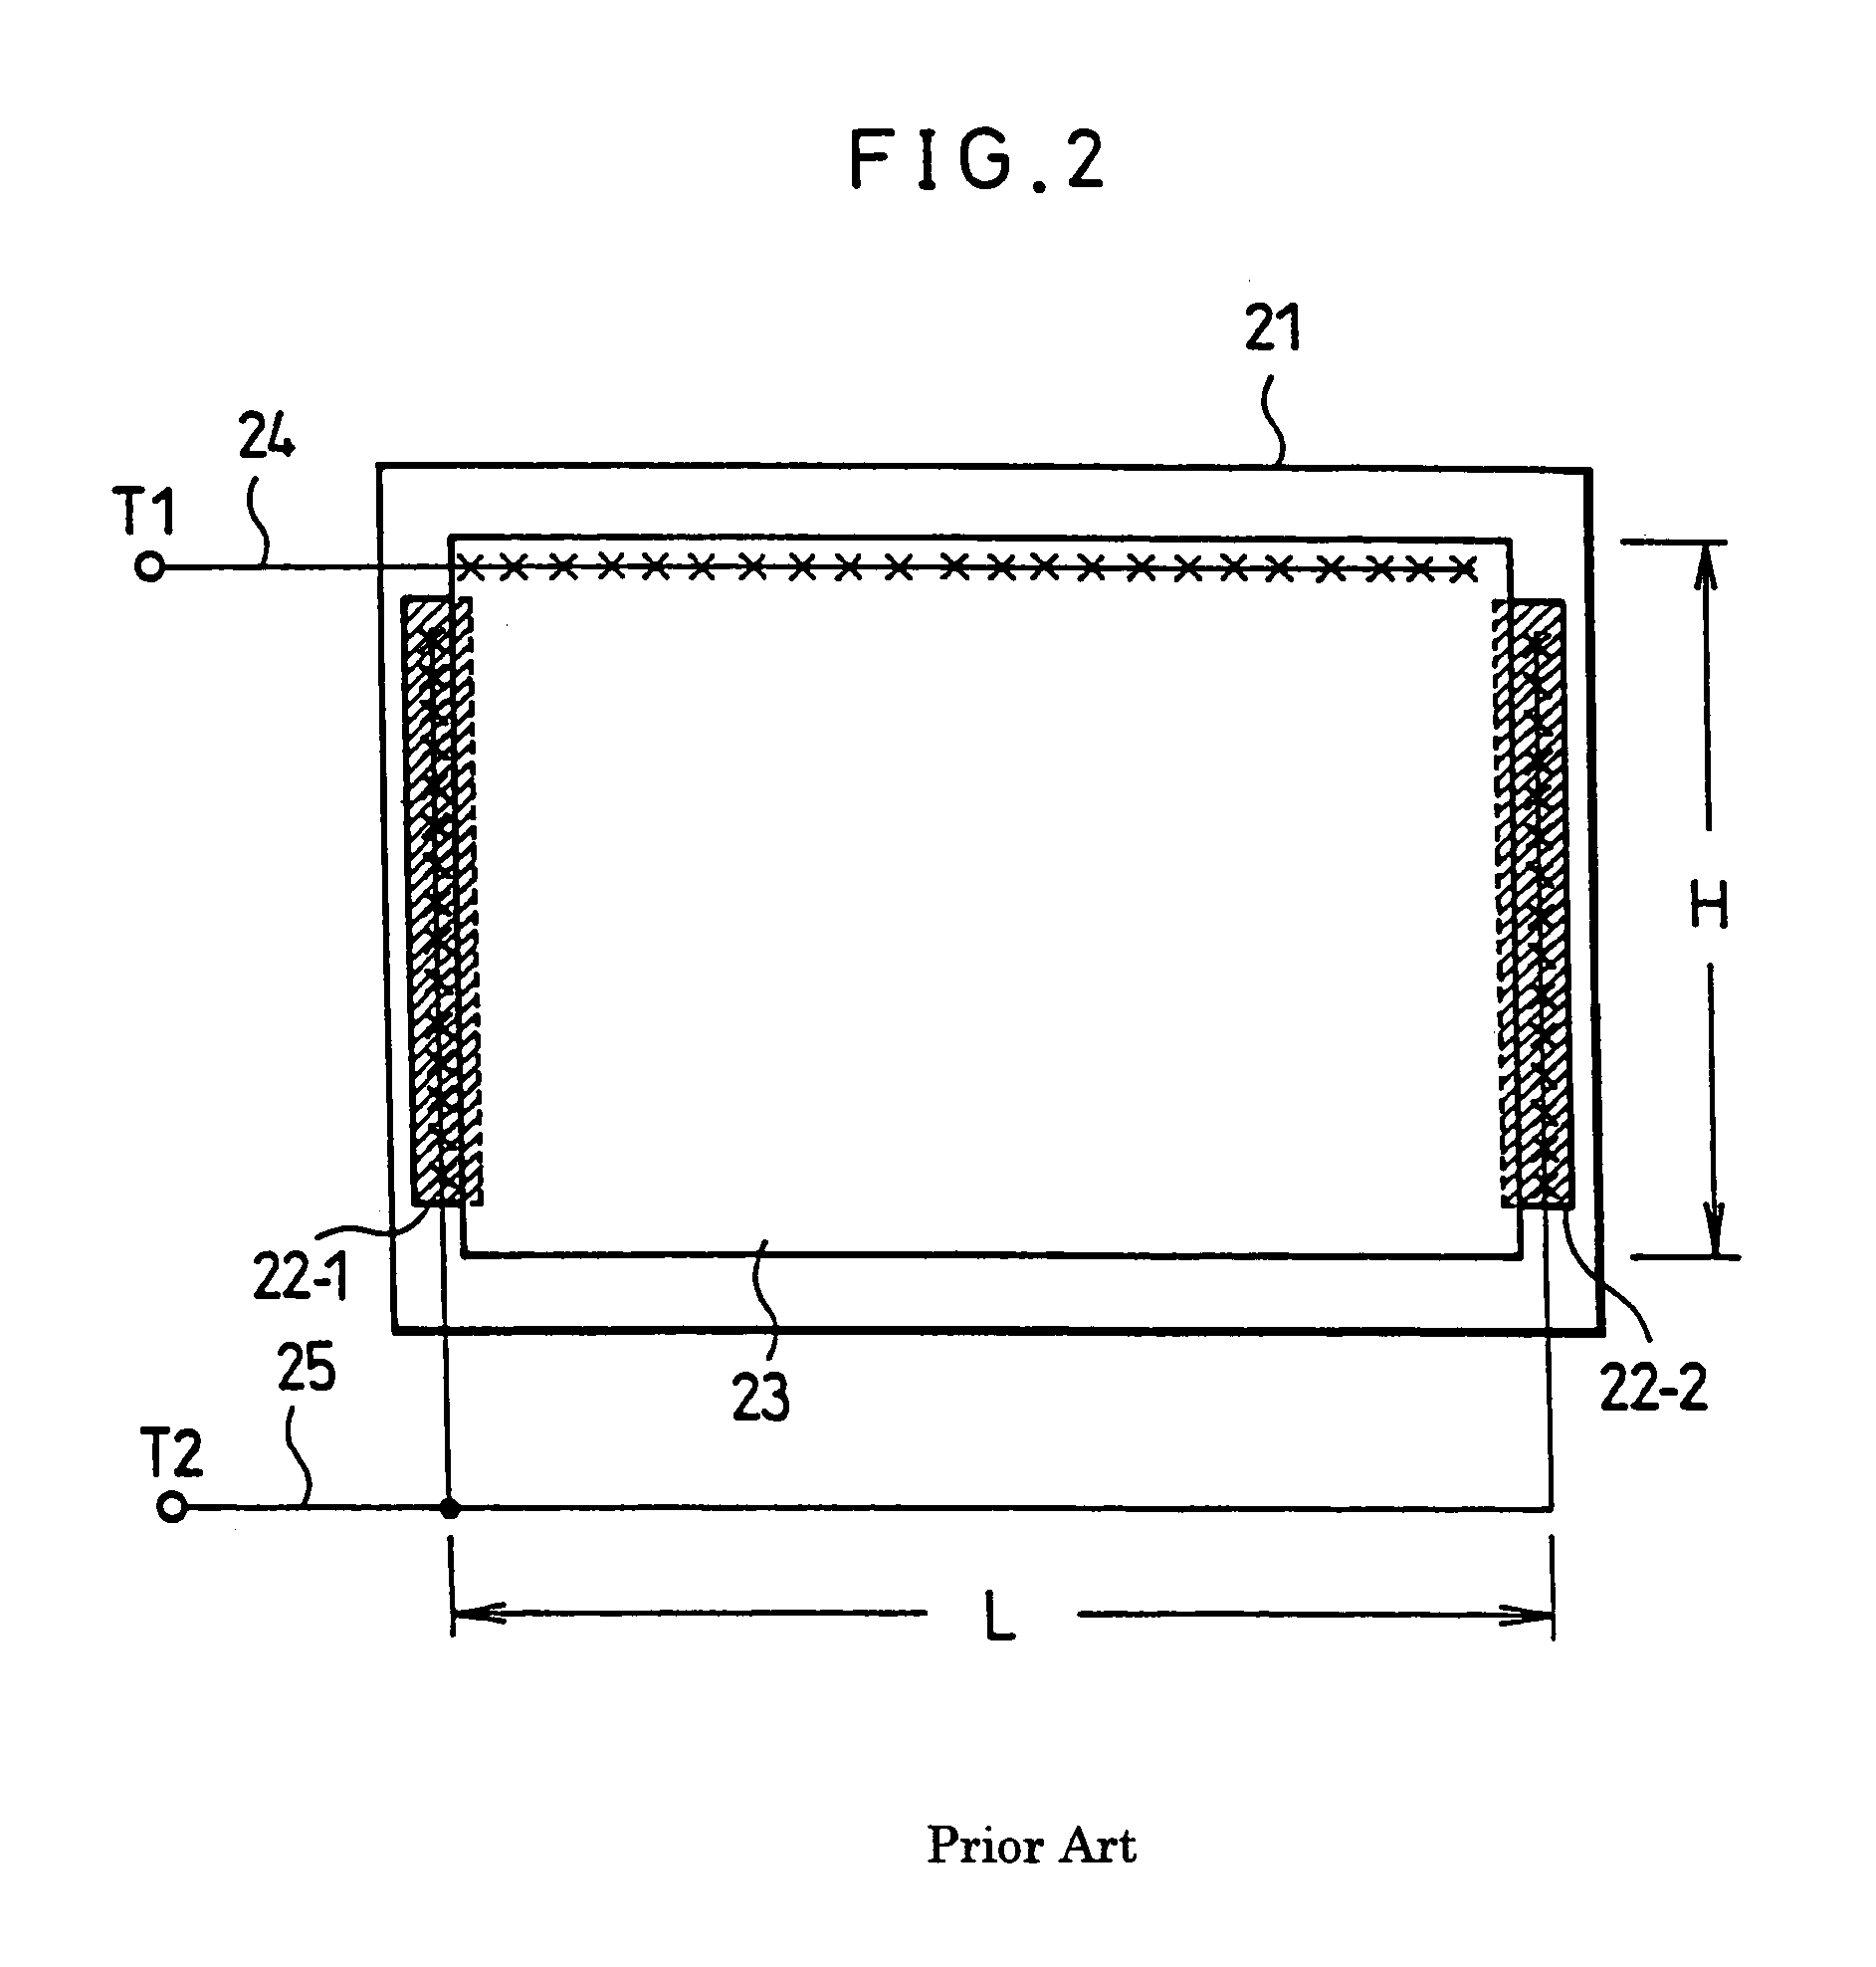 Driver for driving a load using a charge pump circuit